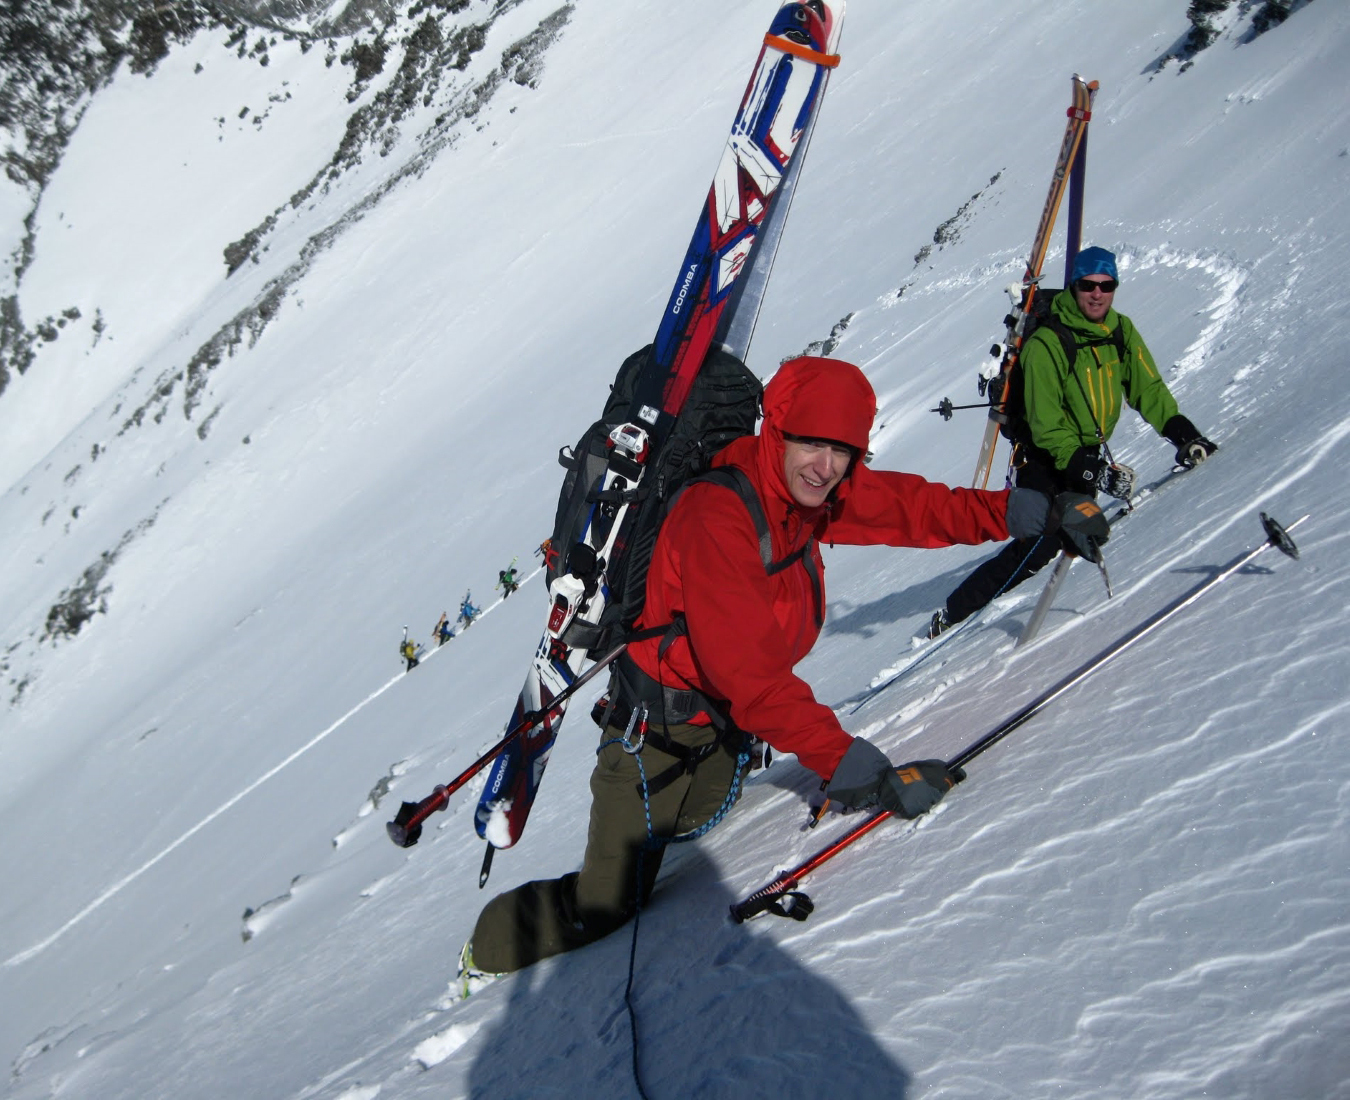 Two backcountry skiers ascend a steep slope on the classic Europe Haute Route ski tour.